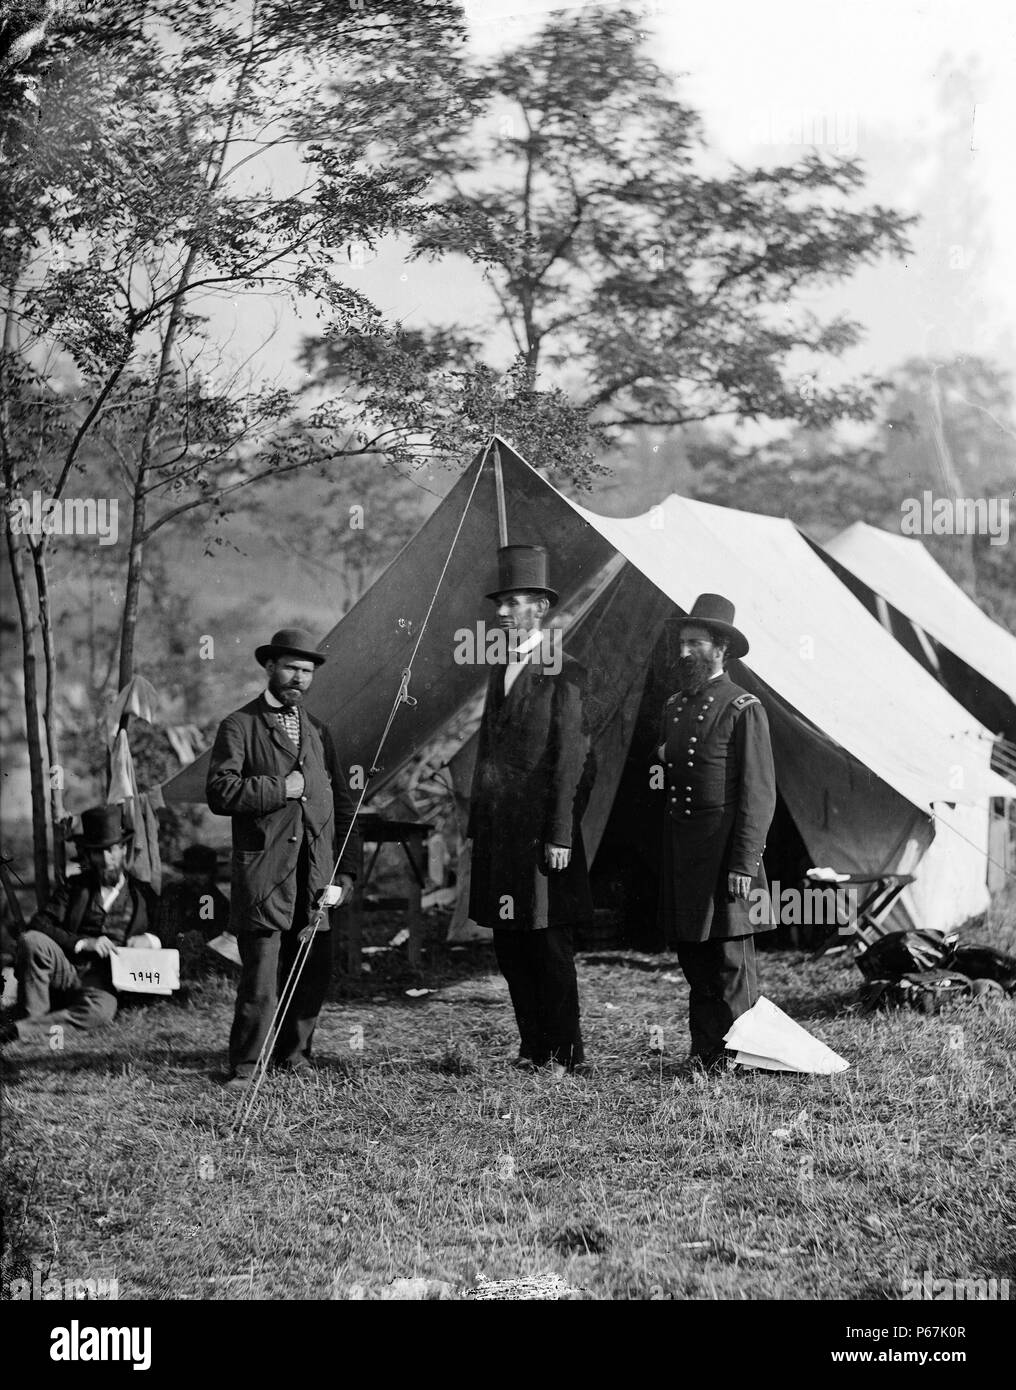 President Lincoln with Gen. George B. McClellan and Maj. Gen. John A. McClernand at the Battle of Antietam in Maryland. The image was taken during his visit to General McClellan, commander of the Army of the Potomac, to encourage 'Little Mac' to attack the Confederate Army. Stock Photo